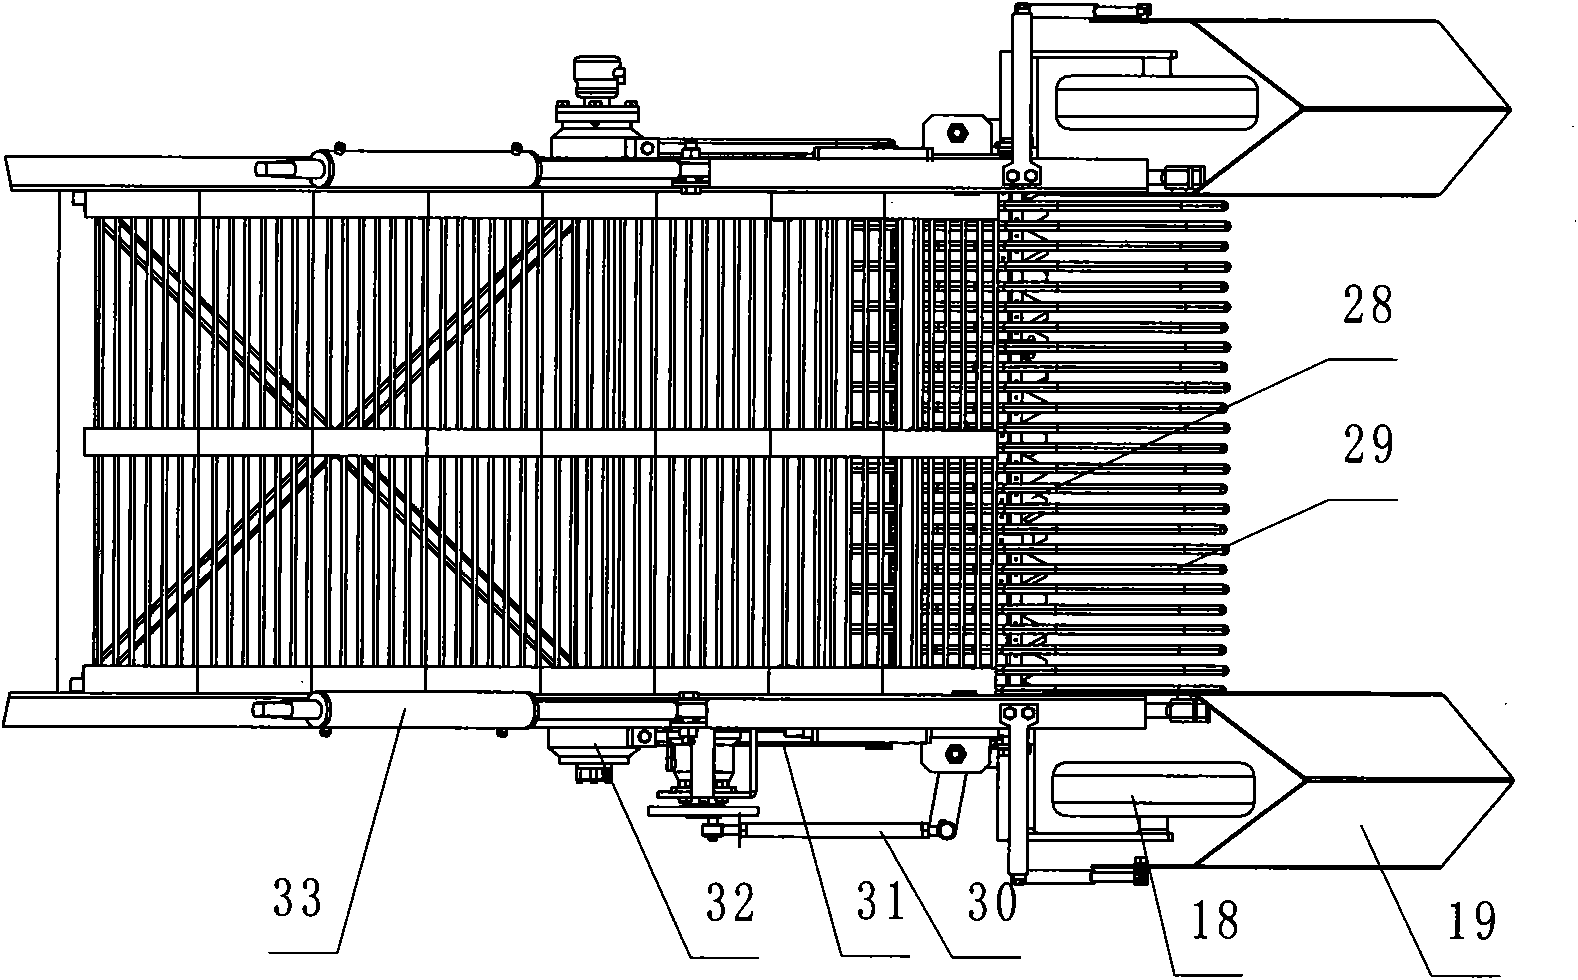 Hydraulic system for self-propelled tomato harvester